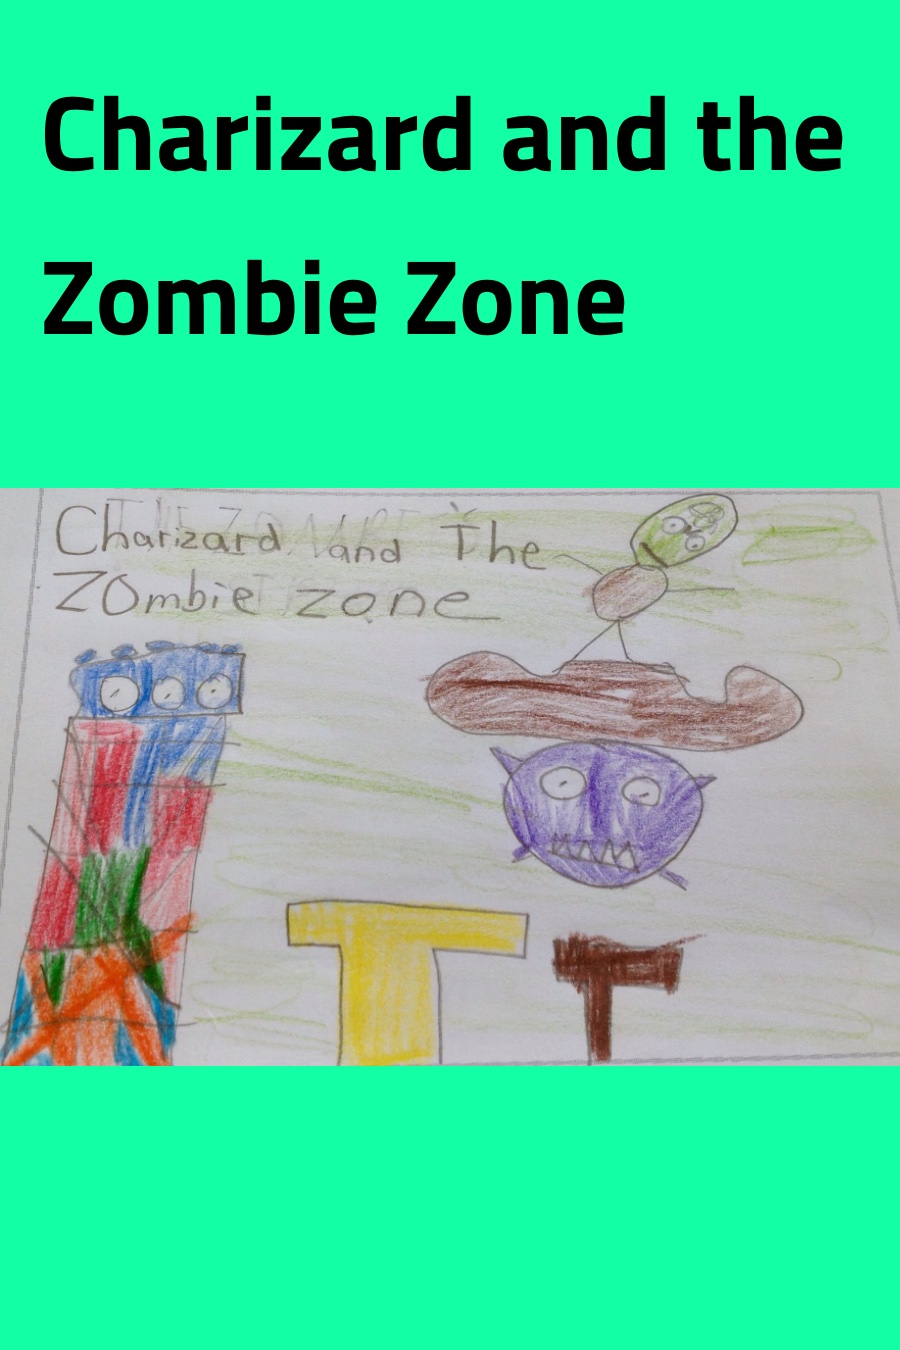 Charizard and the Zombie Zone by Joshua P